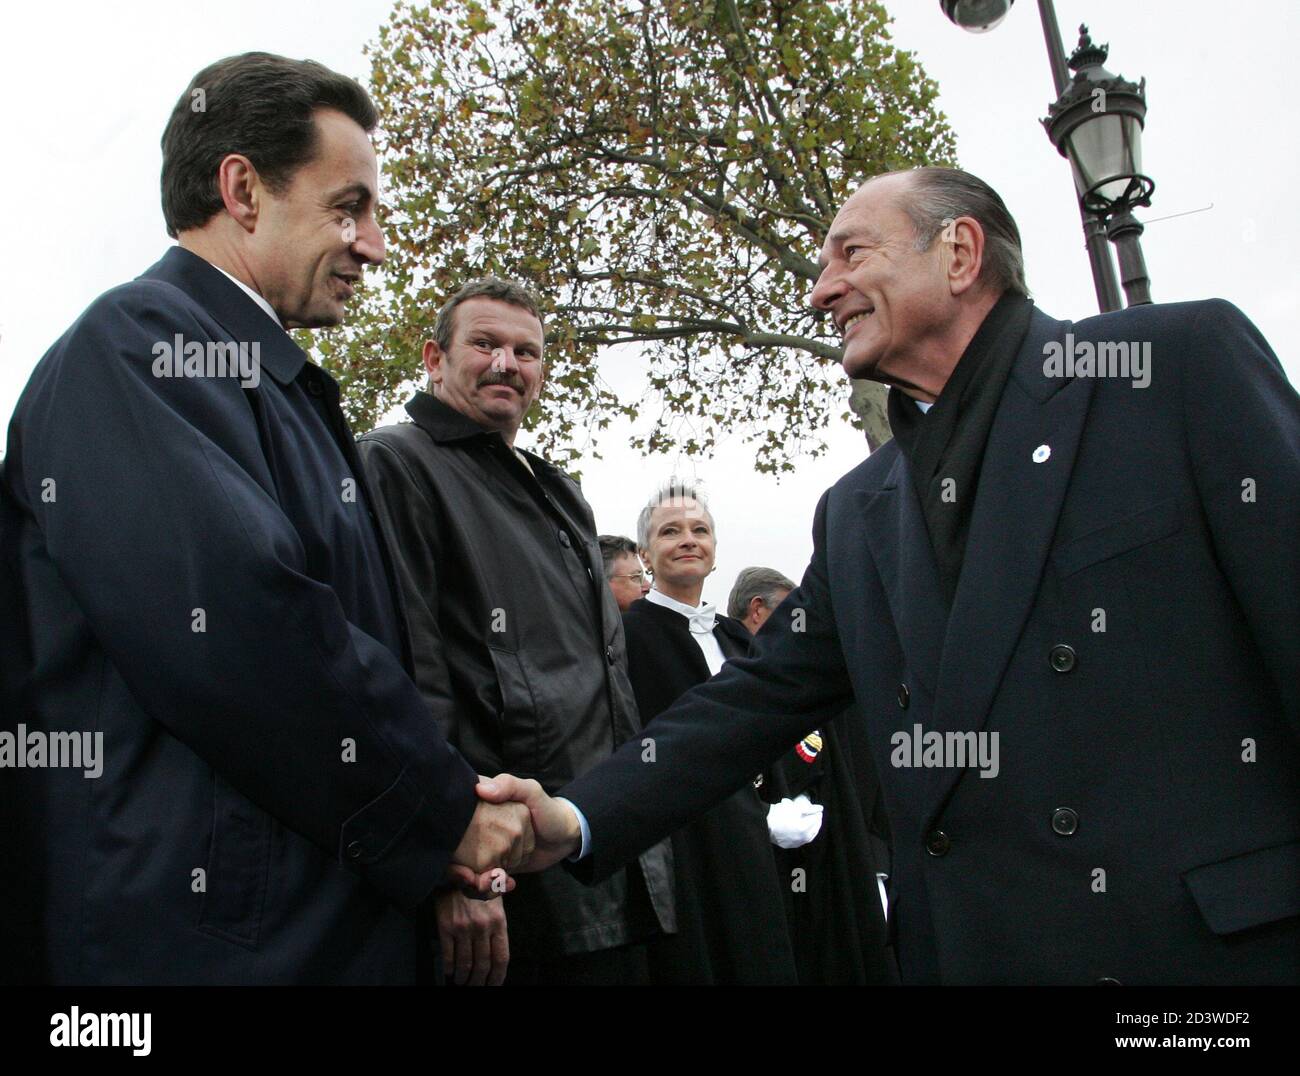 French President Jacques Chirac (R) and Finance Minister Nicholas Sarkozy (L) meet during armistice day ceremonies in Paris, November 11, 2004. Sarkozy is widely expected to challenge Chirac for the presidency in the next French elections. REUTERS/Patrick Kovarik/Pool  MLM/nf/ws Stock Photo